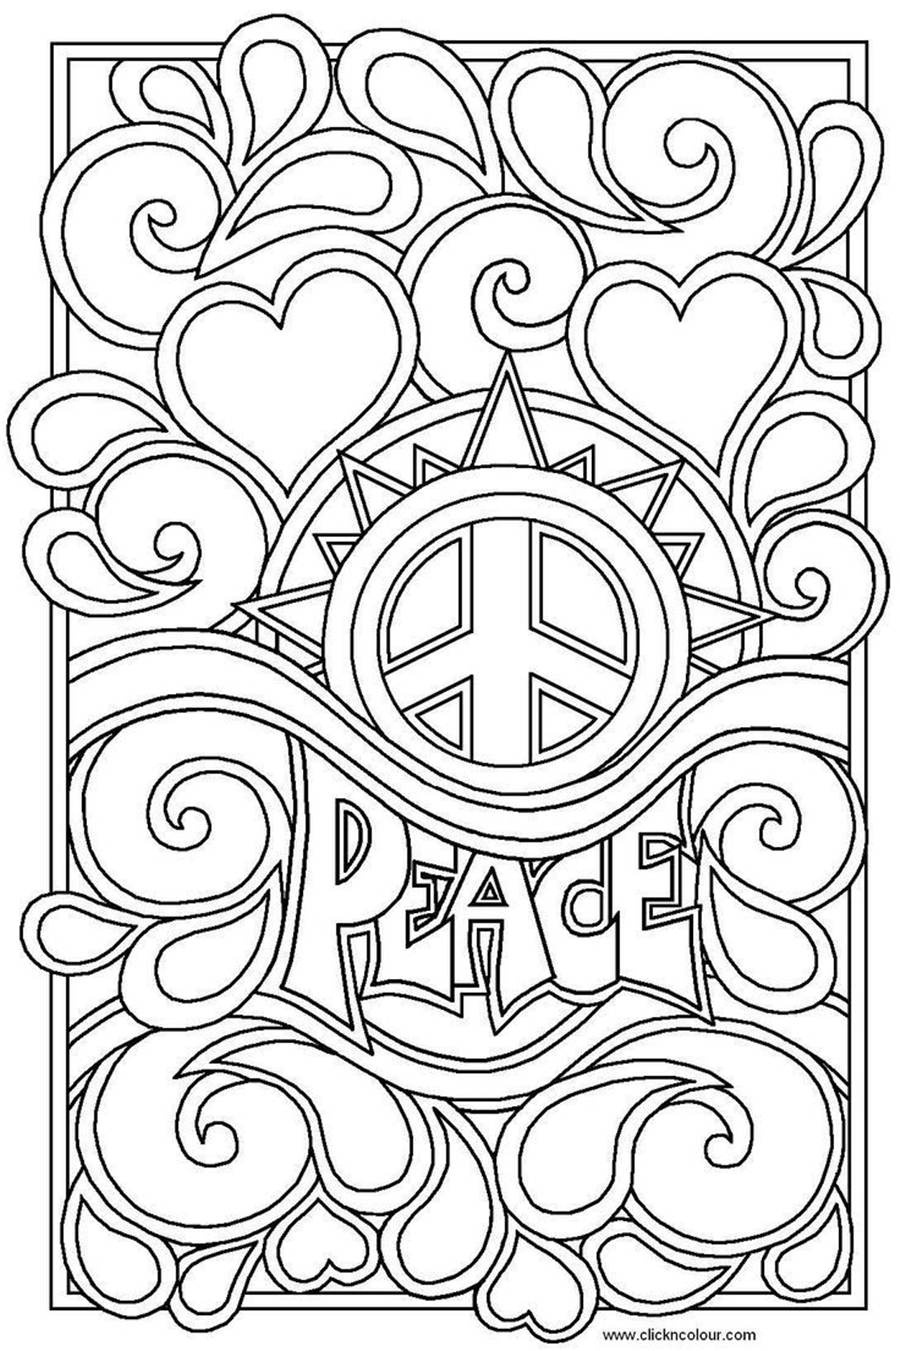 printable respect authority coloring page Top 10 printable respect coloring pages